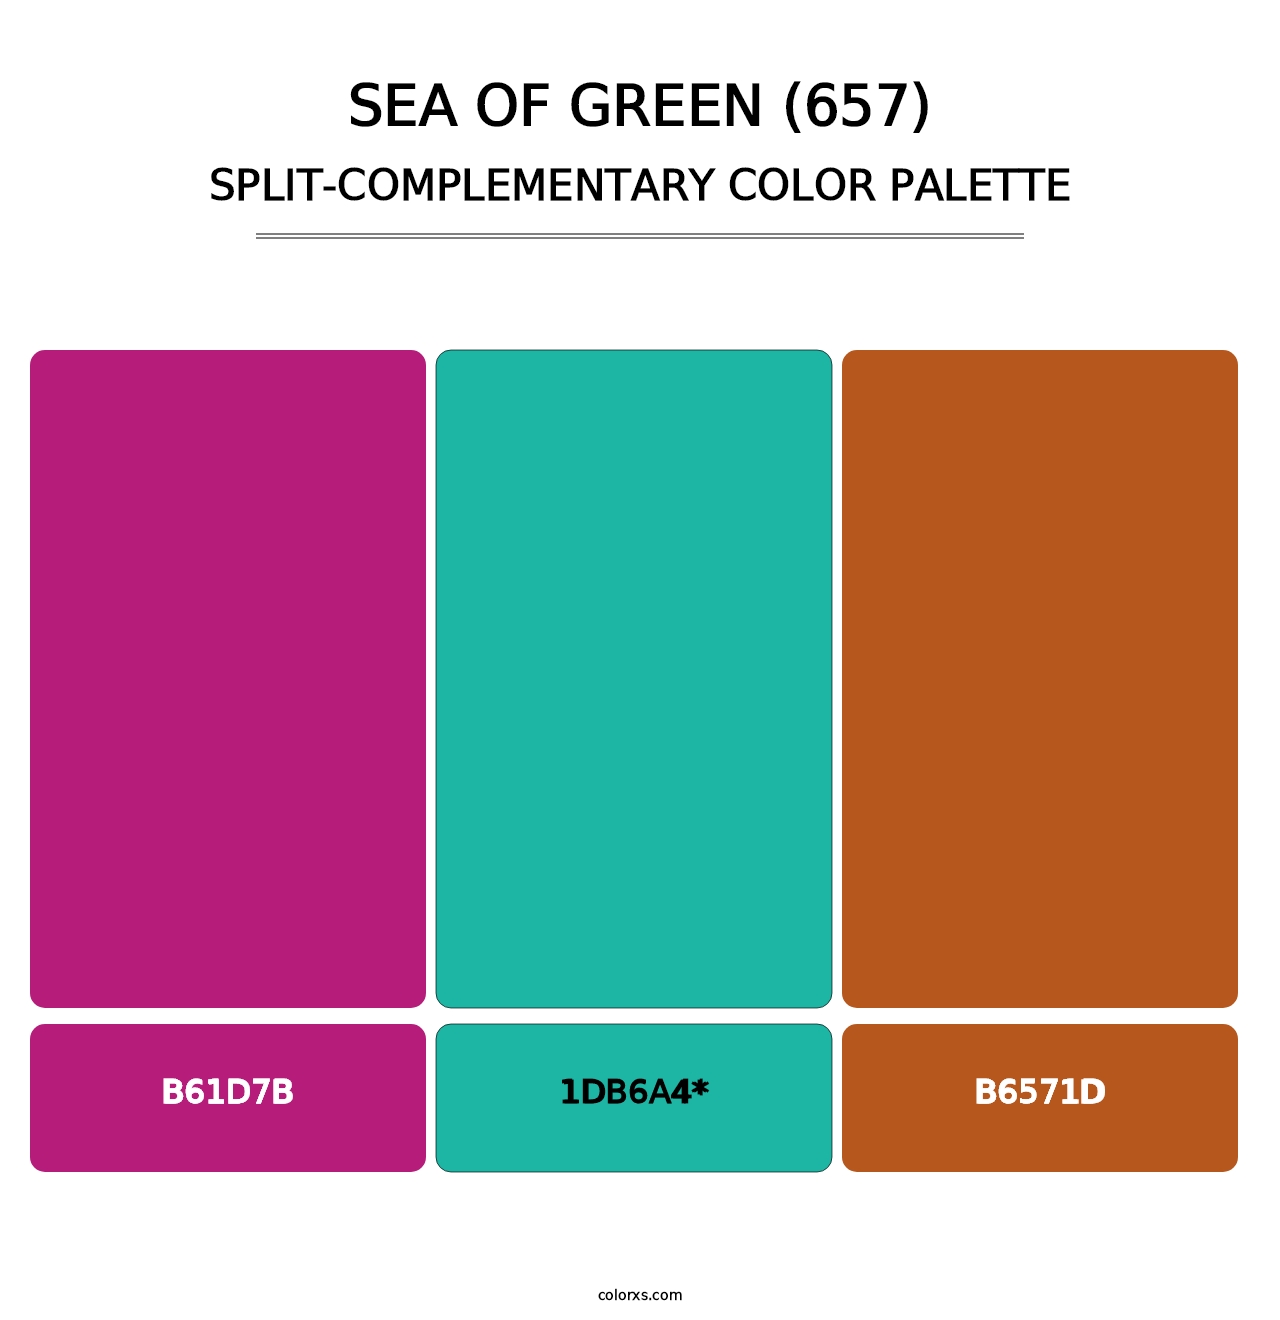 Sea of Green (657) - Split-Complementary Color Palette